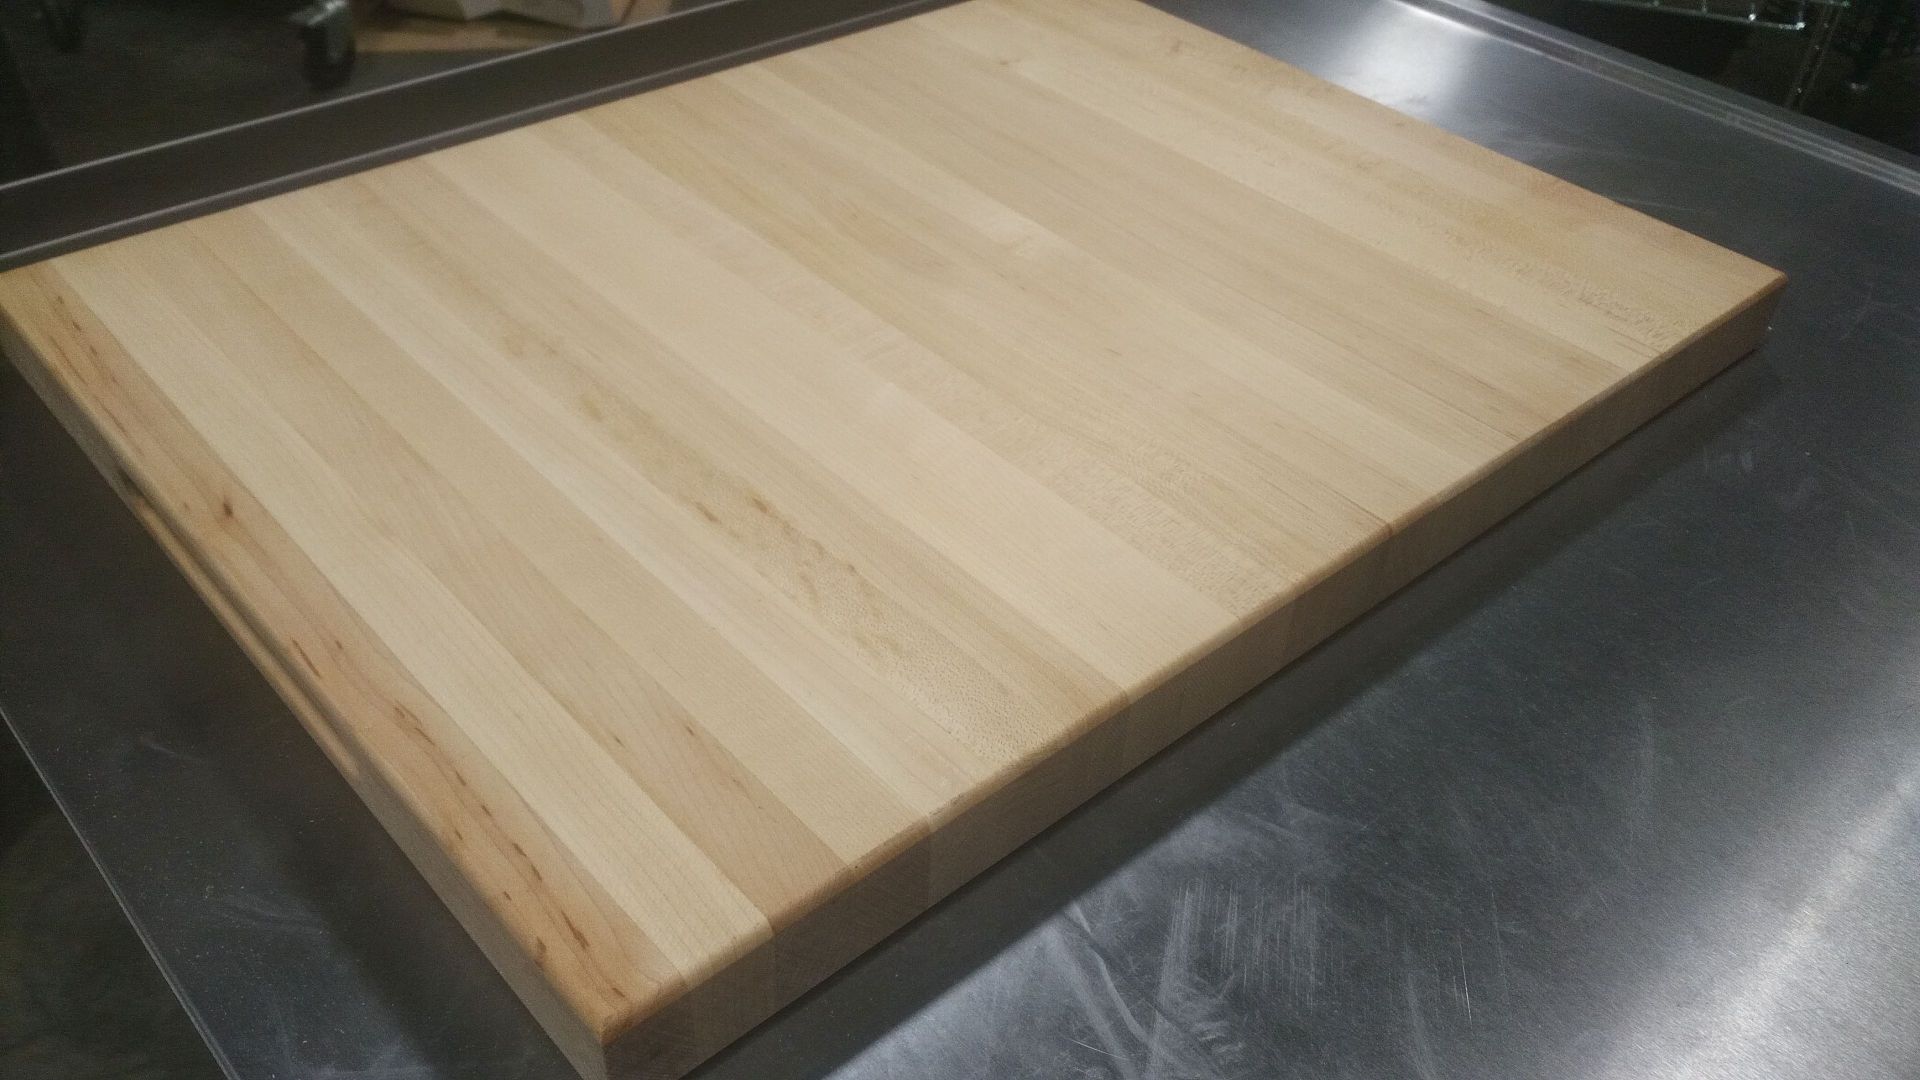 20" x 15" x 1.5" Hard Canadian Maple Solid Carving Board